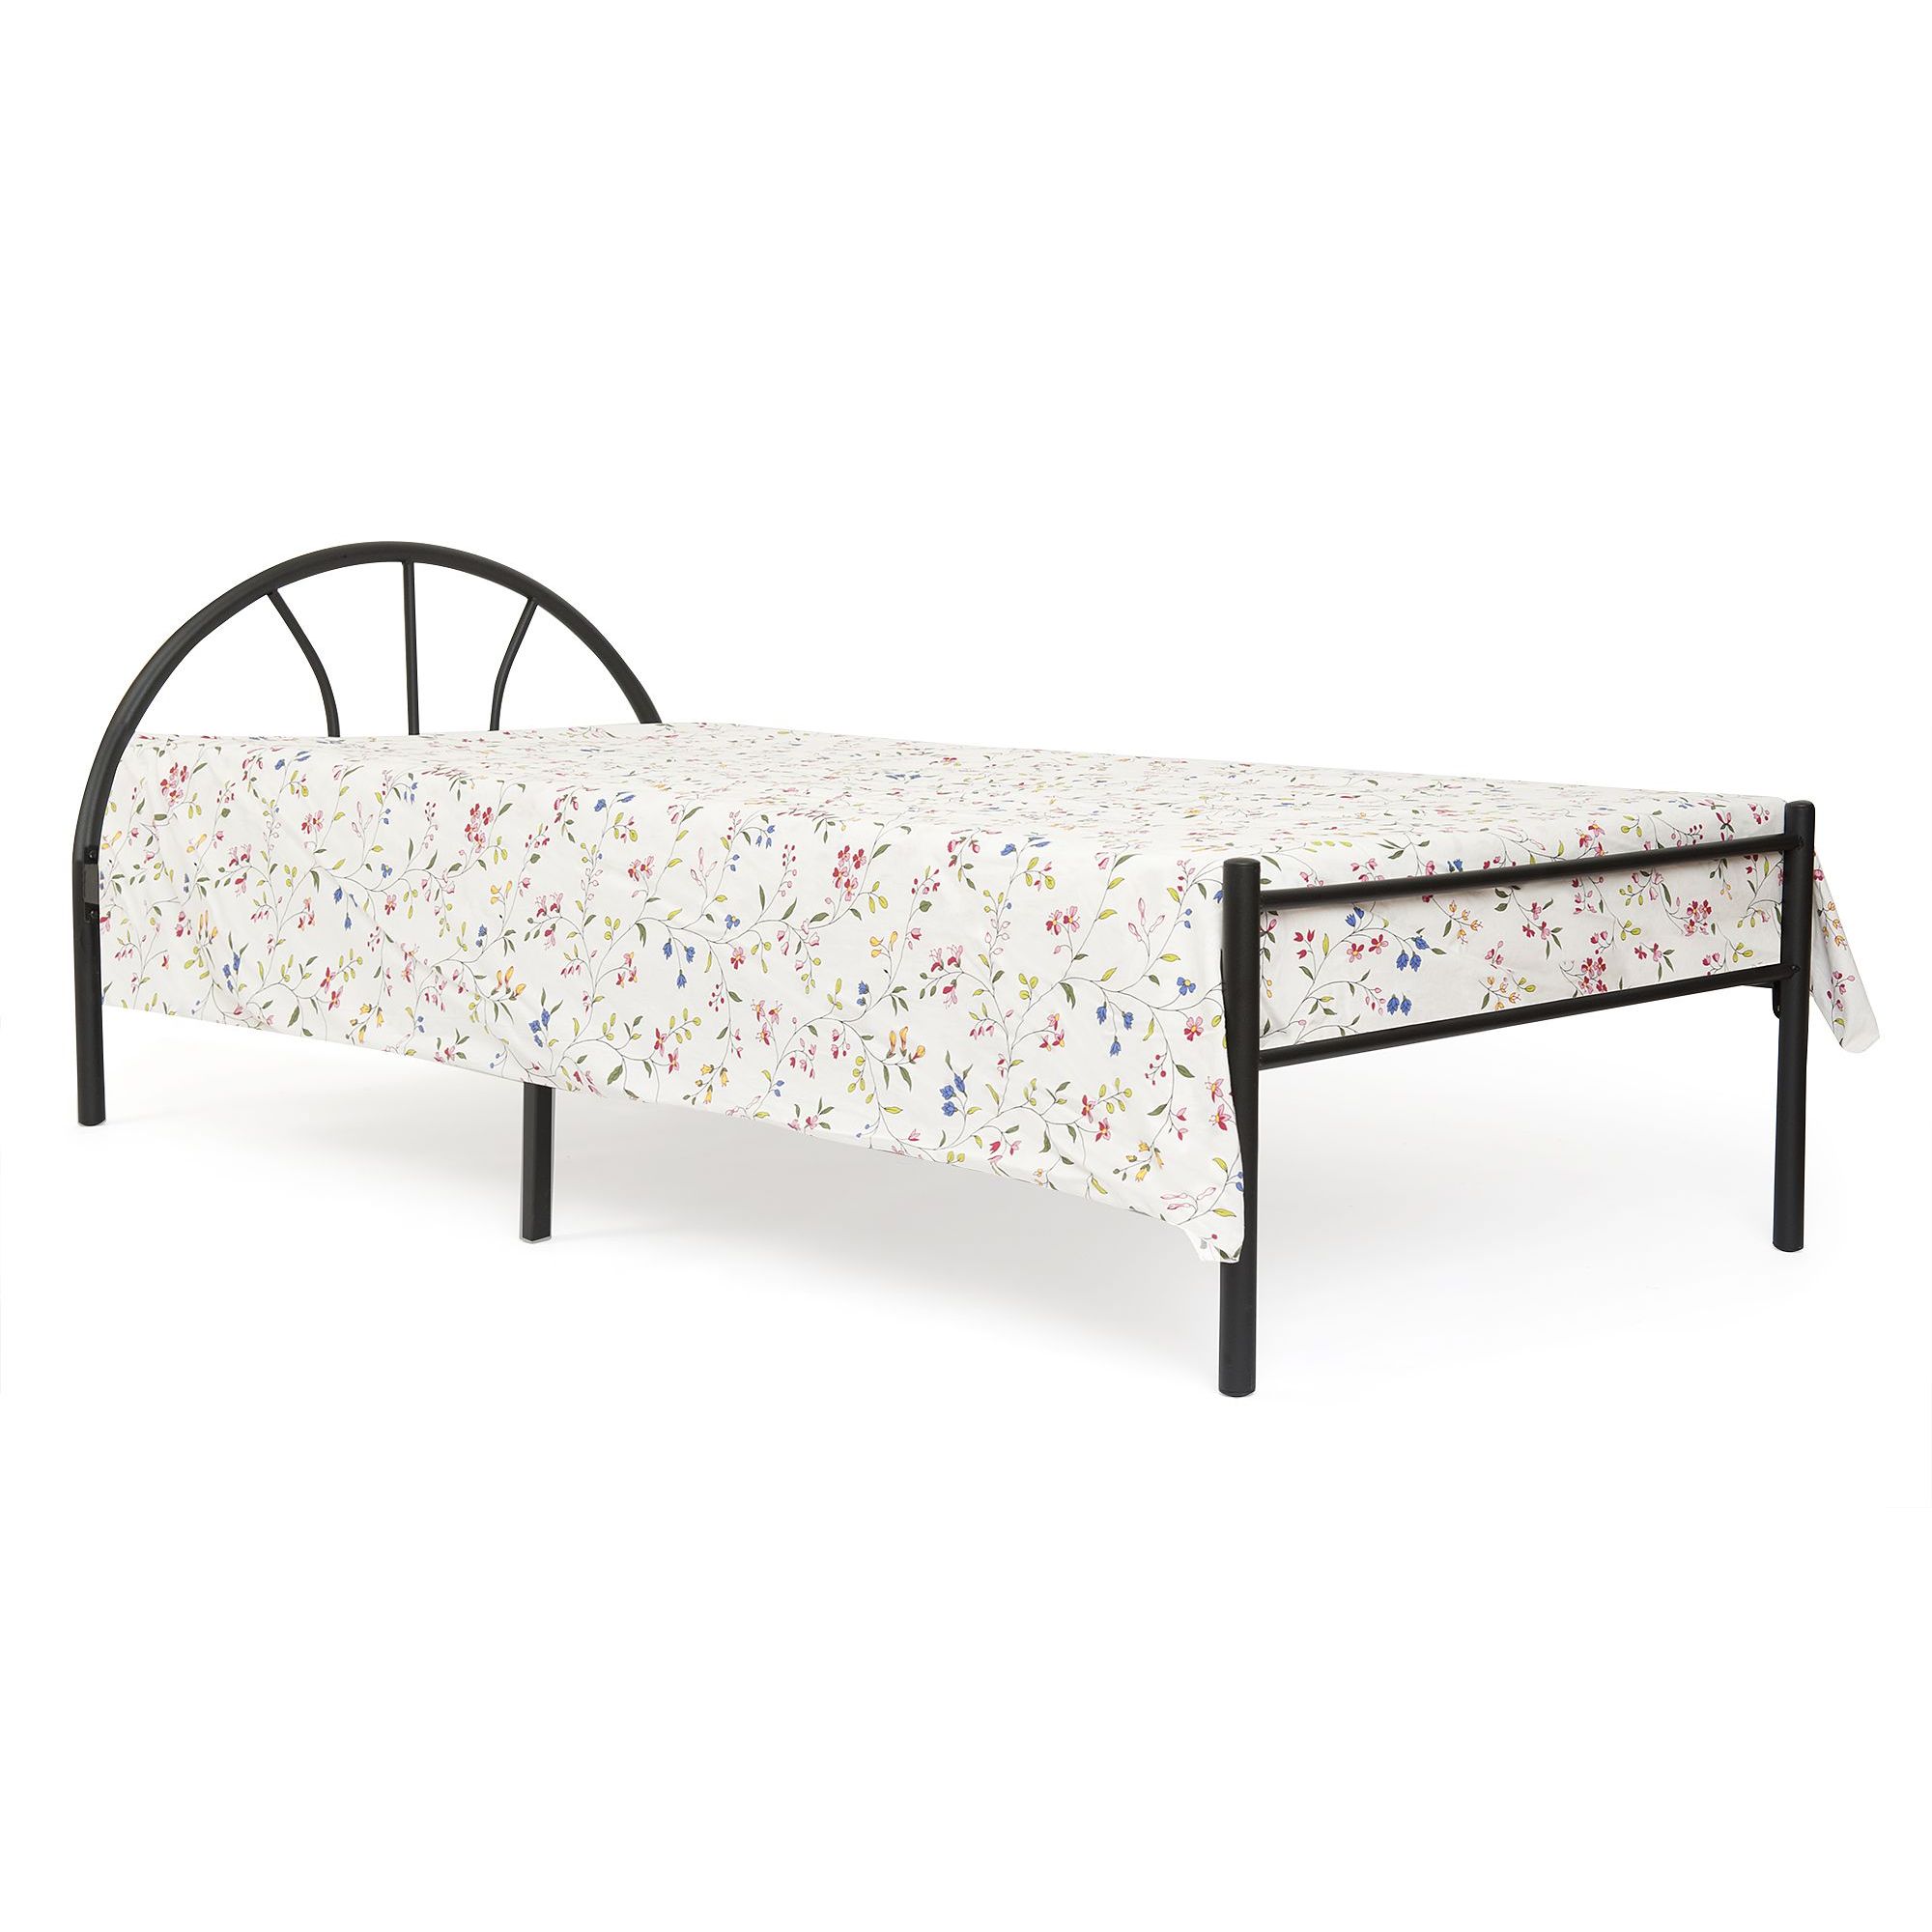  Asia Tube AT-233 Single bed